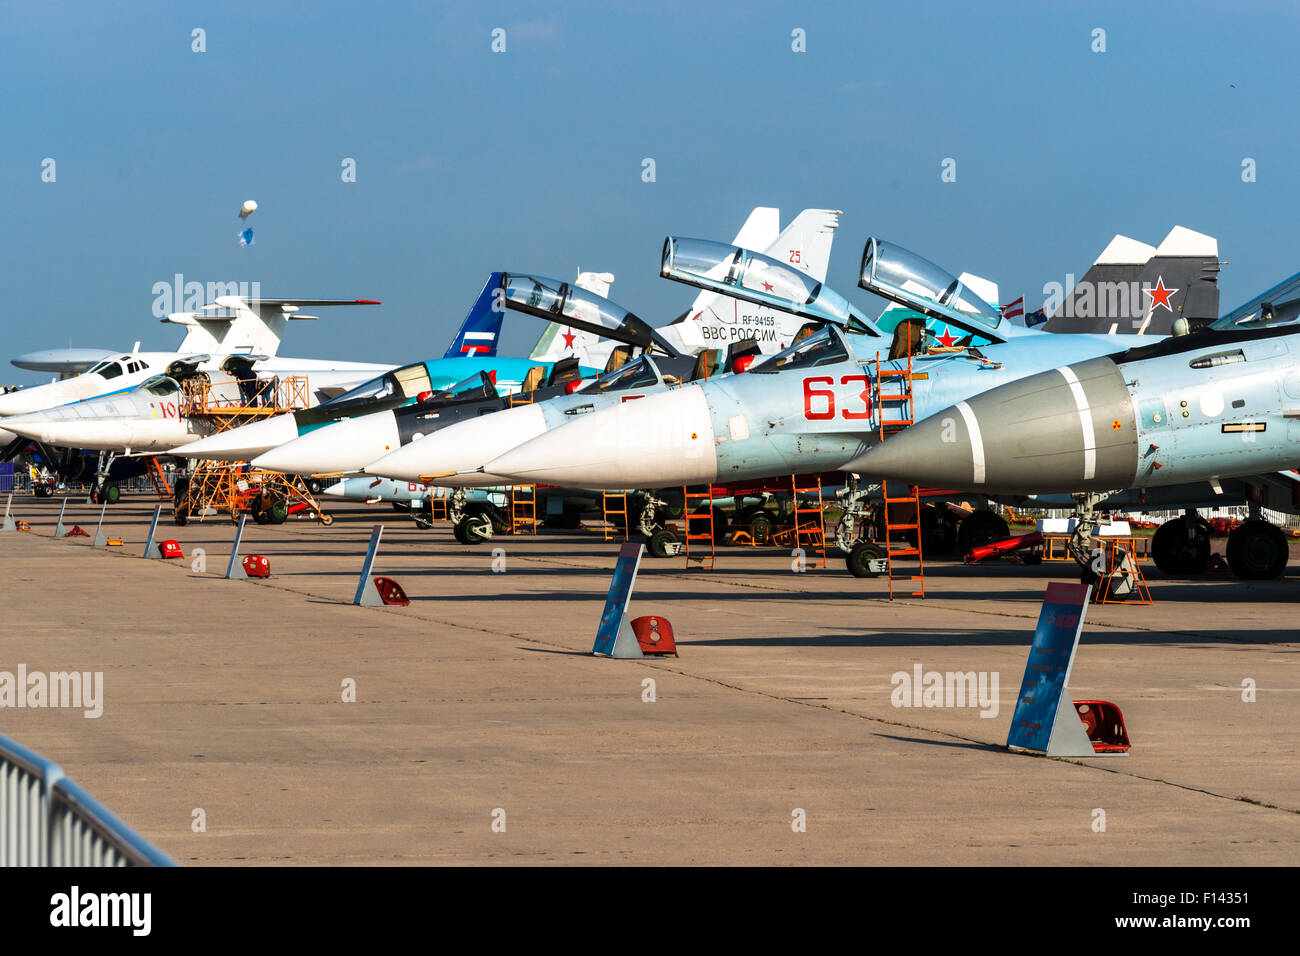 Moscow, Russia, Wednesday, August 26, 2015. The Twelfth International Moscow Aerospace Show MAKS 2015 was opened in Zhukovsky city in the Moscow Region on August 25, 2015. The aim of the show is to demonstrate Russian aerospace achievements, make contracts and negotiate international projects. Sukhoi fighter planes on display at the static exposition of the air show. Credit:  Alex's Pictures/Alamy Live News Stock Photo